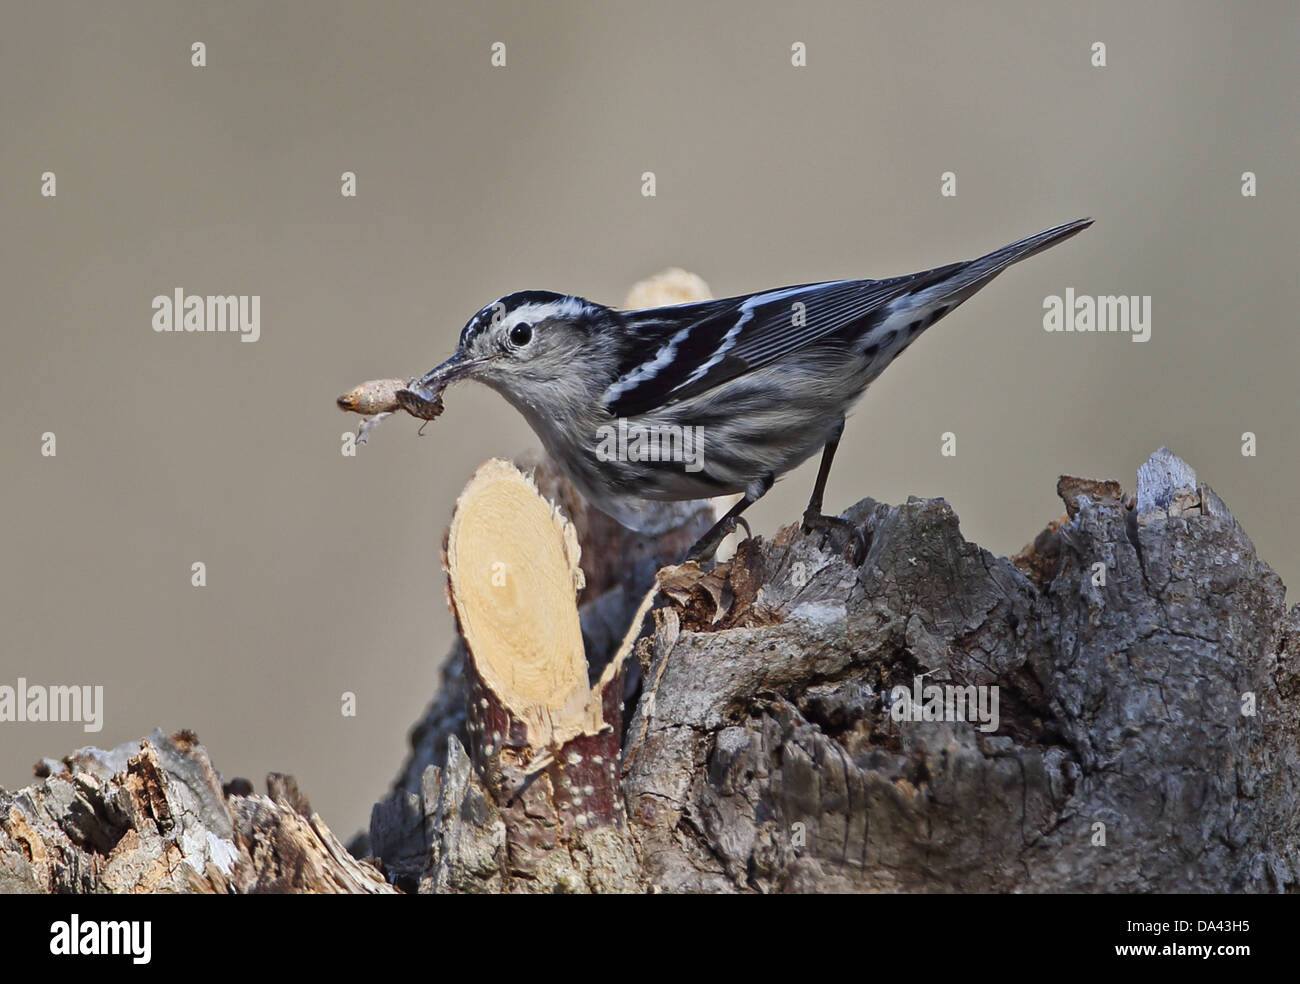 Black-and-white Warbler (Mniotilta varia) adult female with moth prey in beak perched on stump La Belen Camaguey Province Cuba Stock Photo